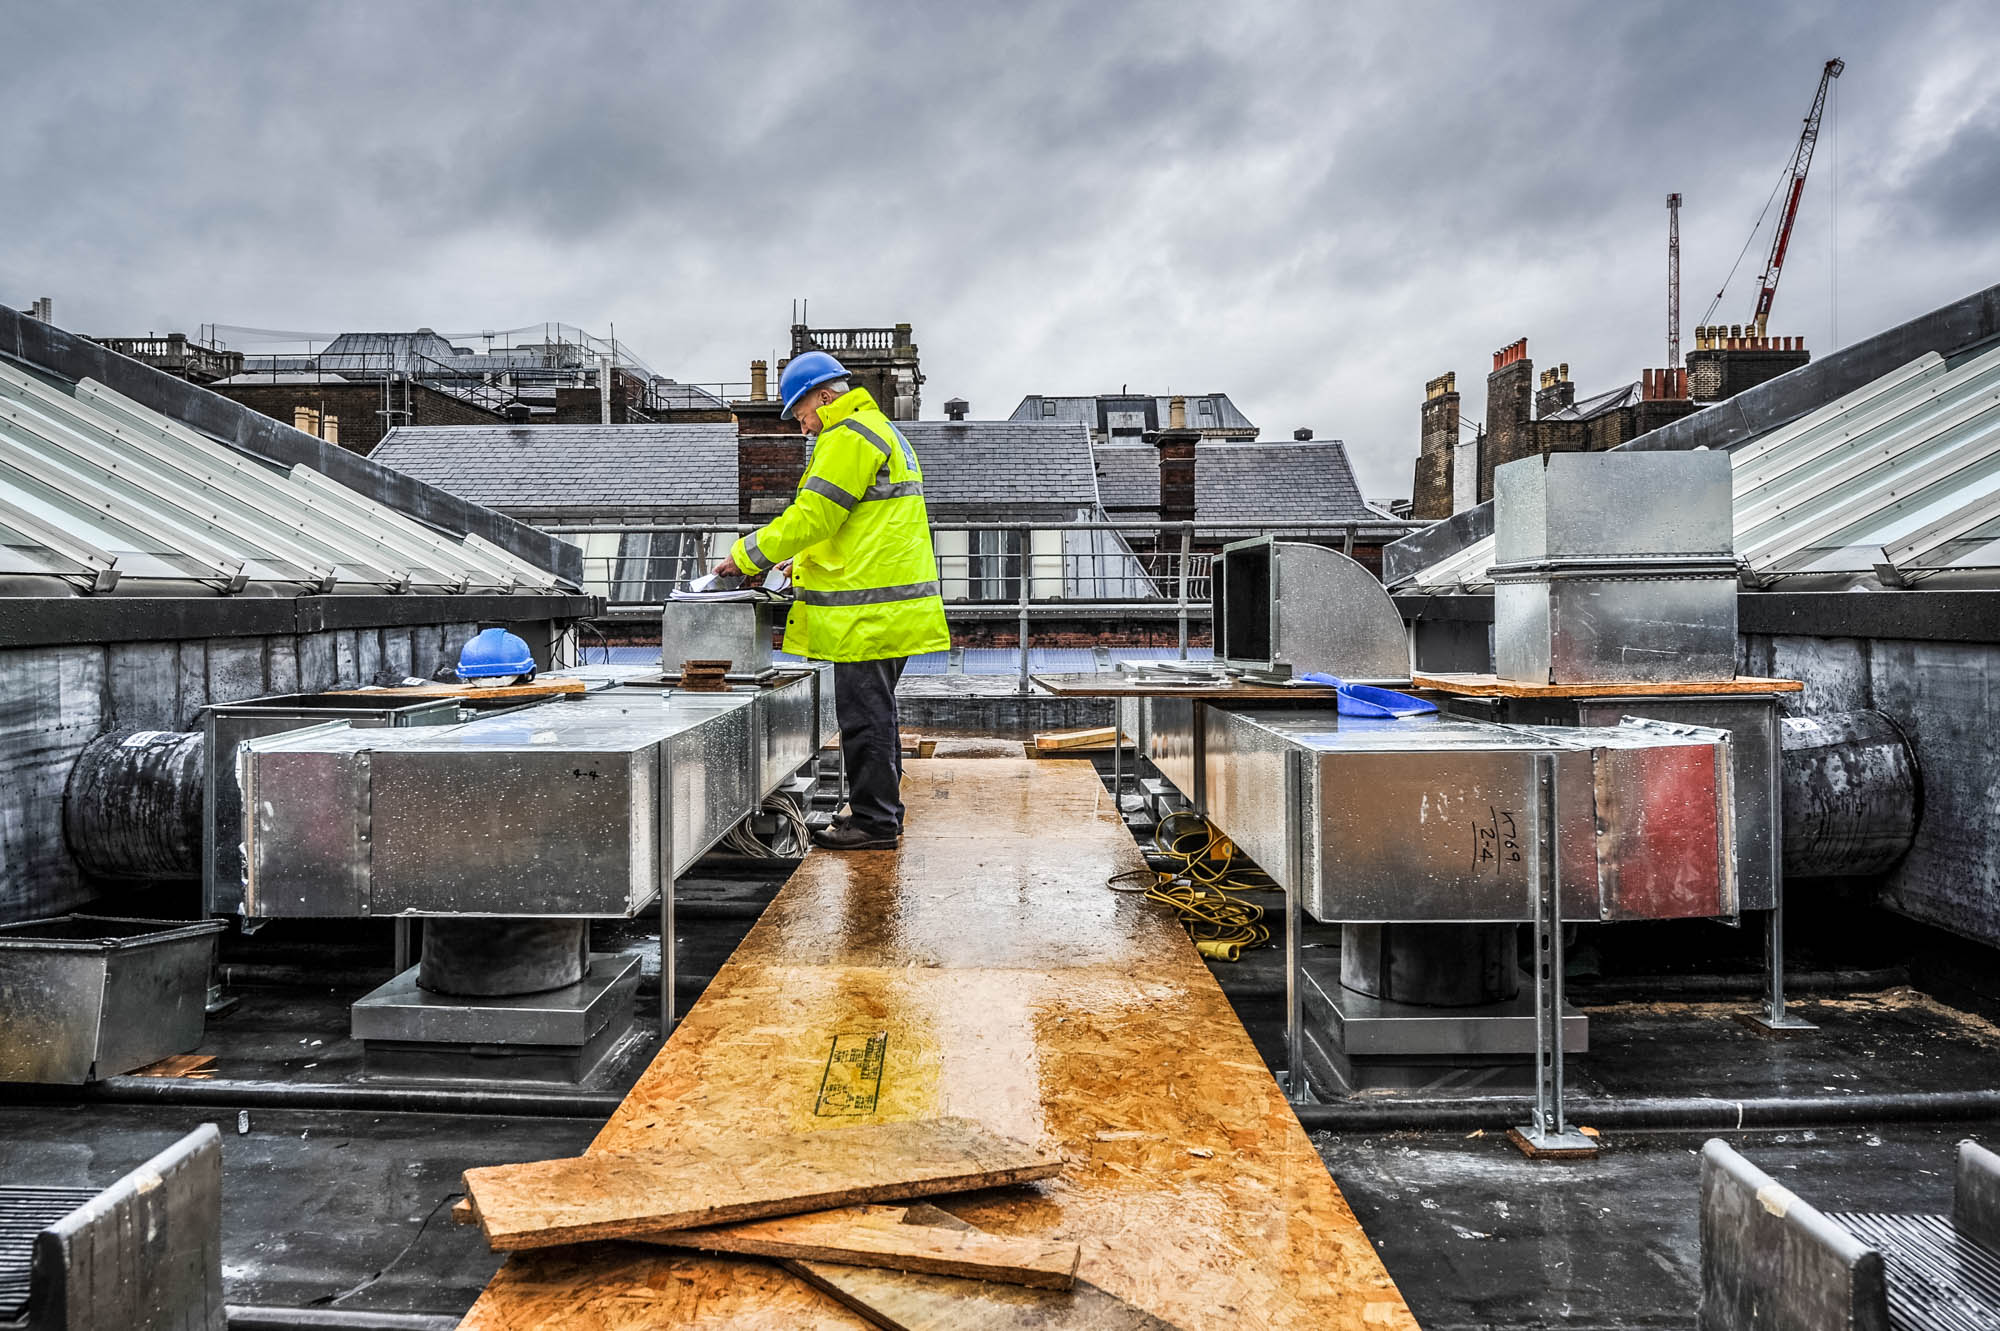 A photo of an architect reviewing plans on the rooftop of a building in central london